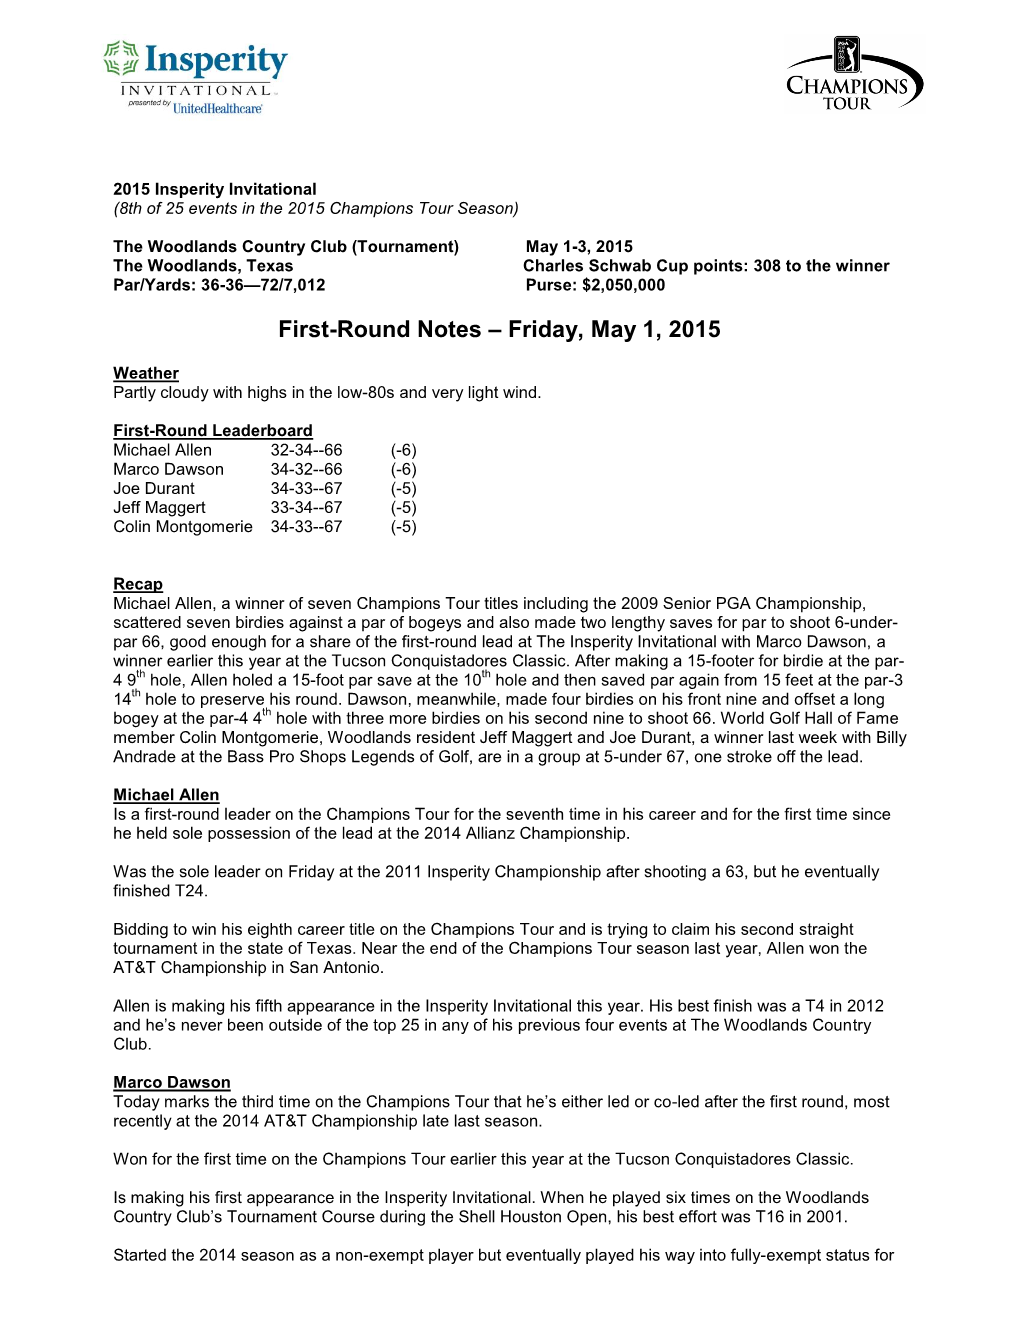 First Round Notes, Friday, May 1